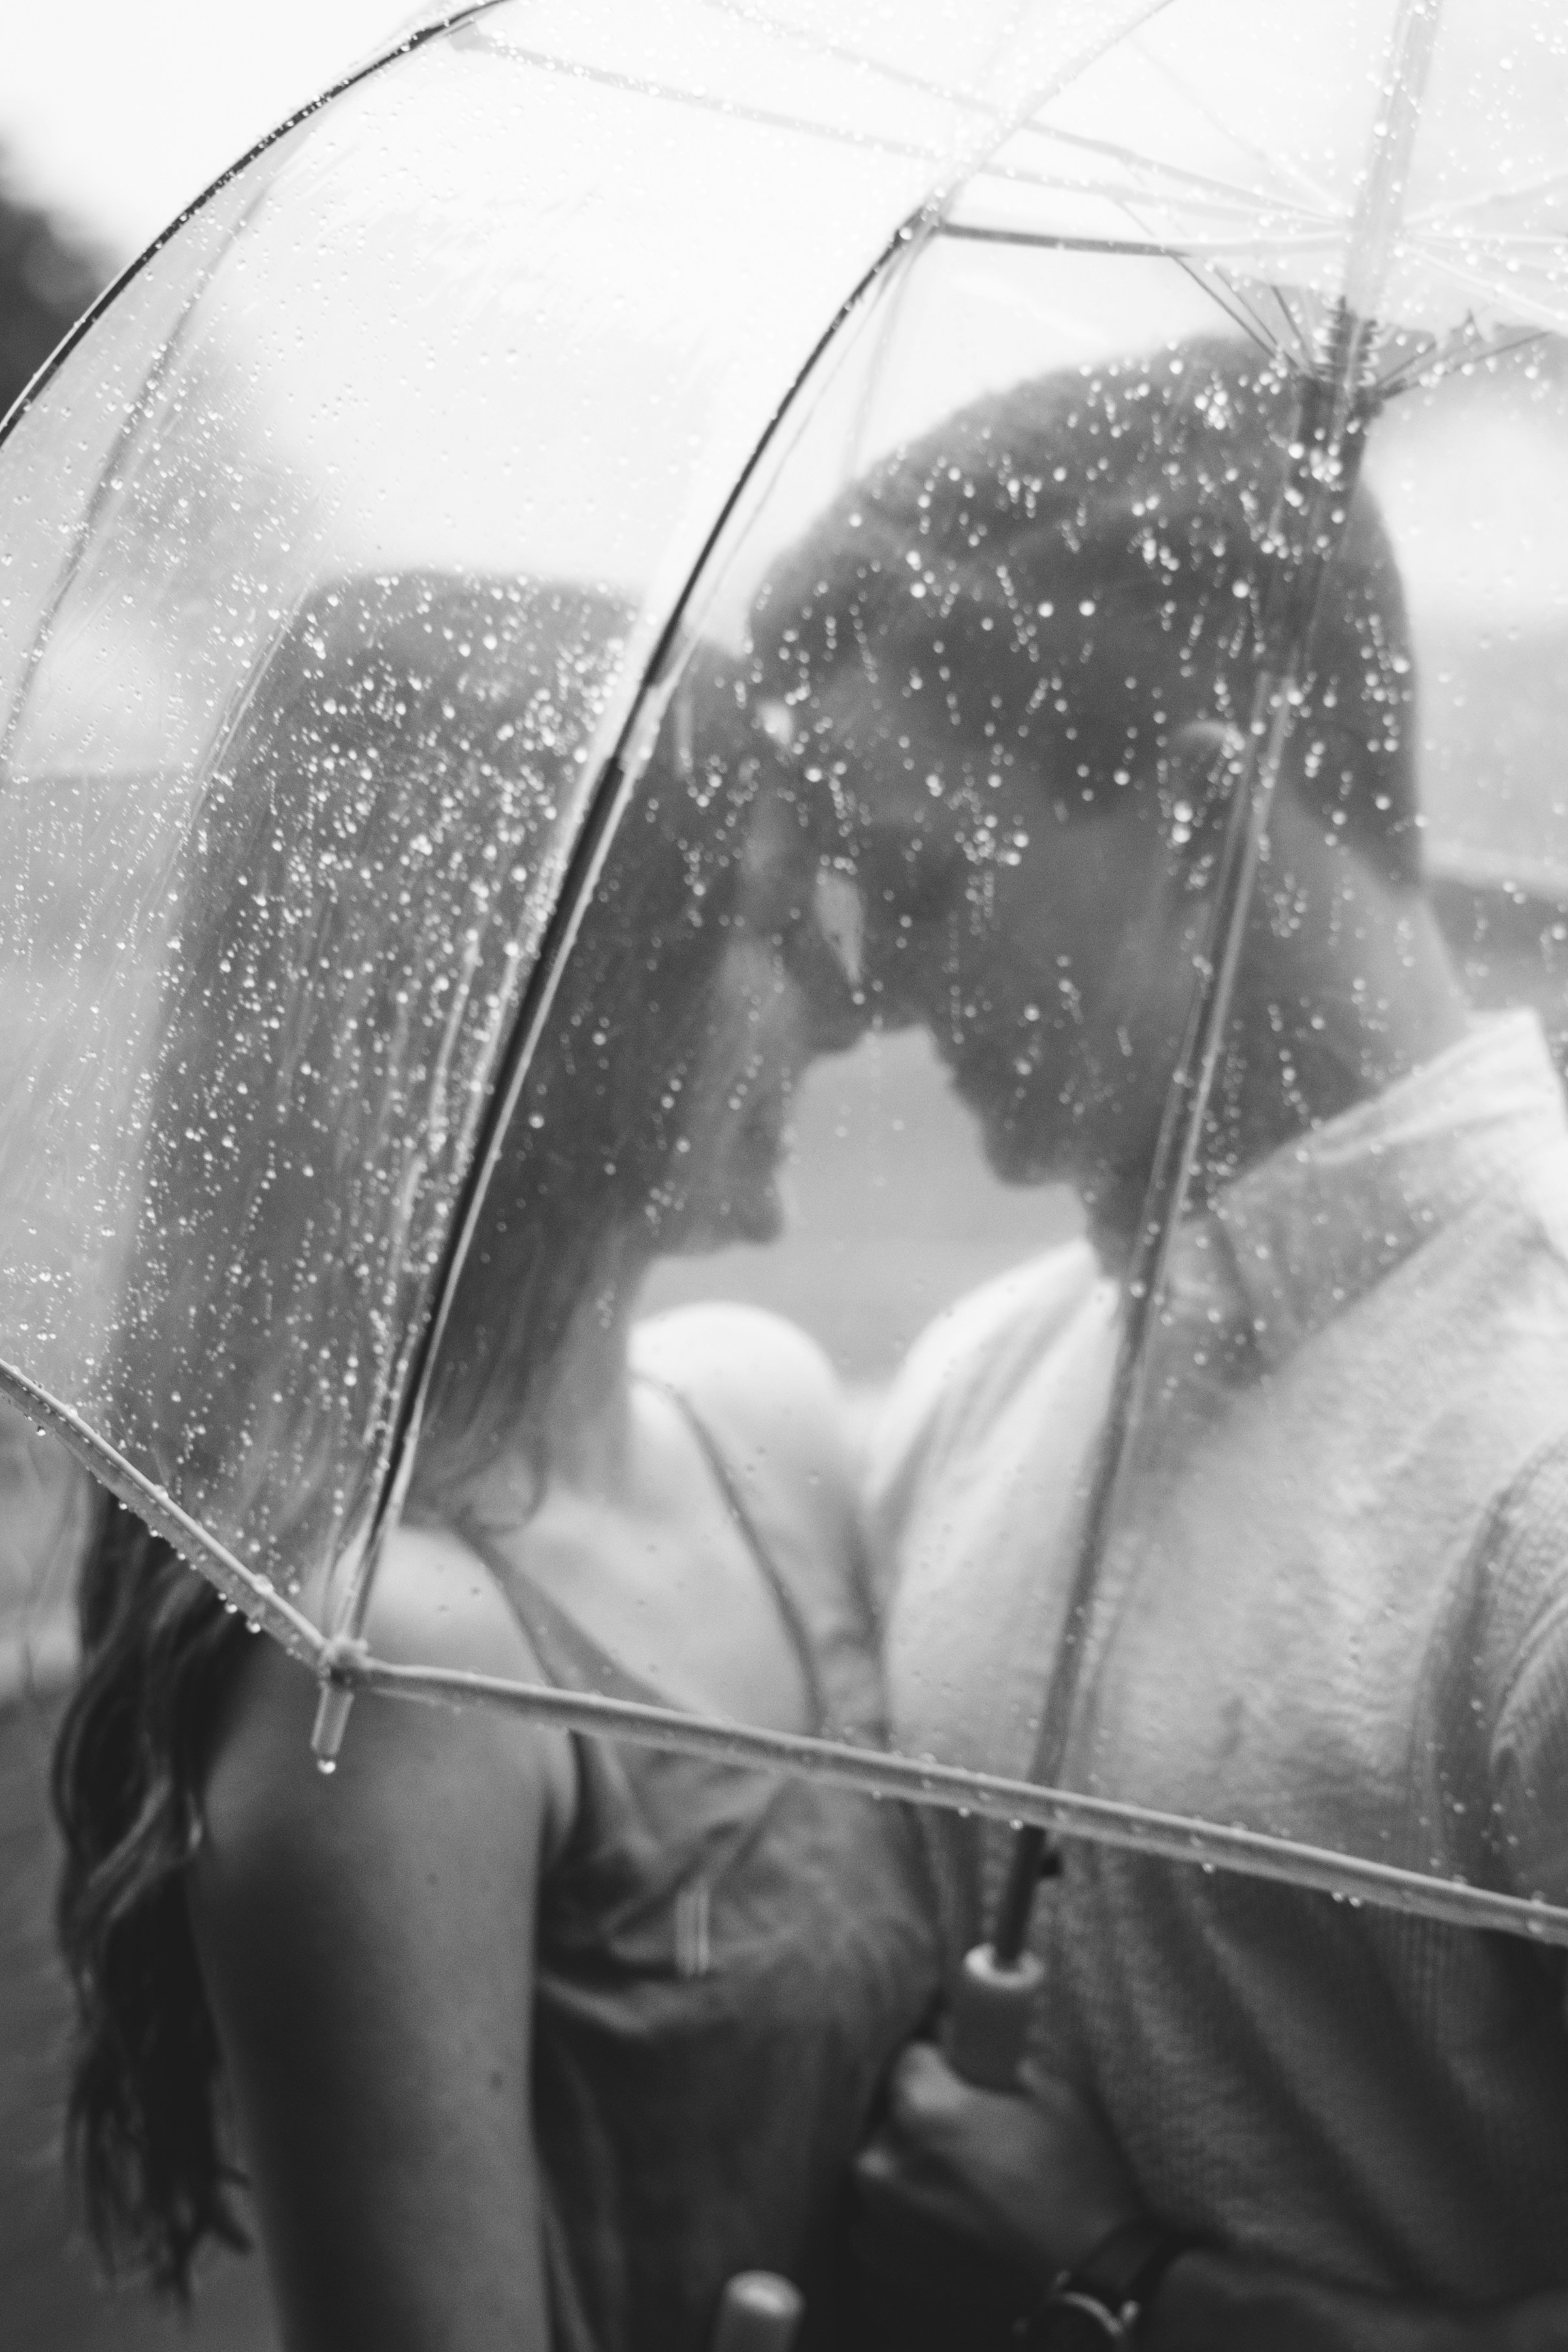 A couple in love | Source: Unsplash